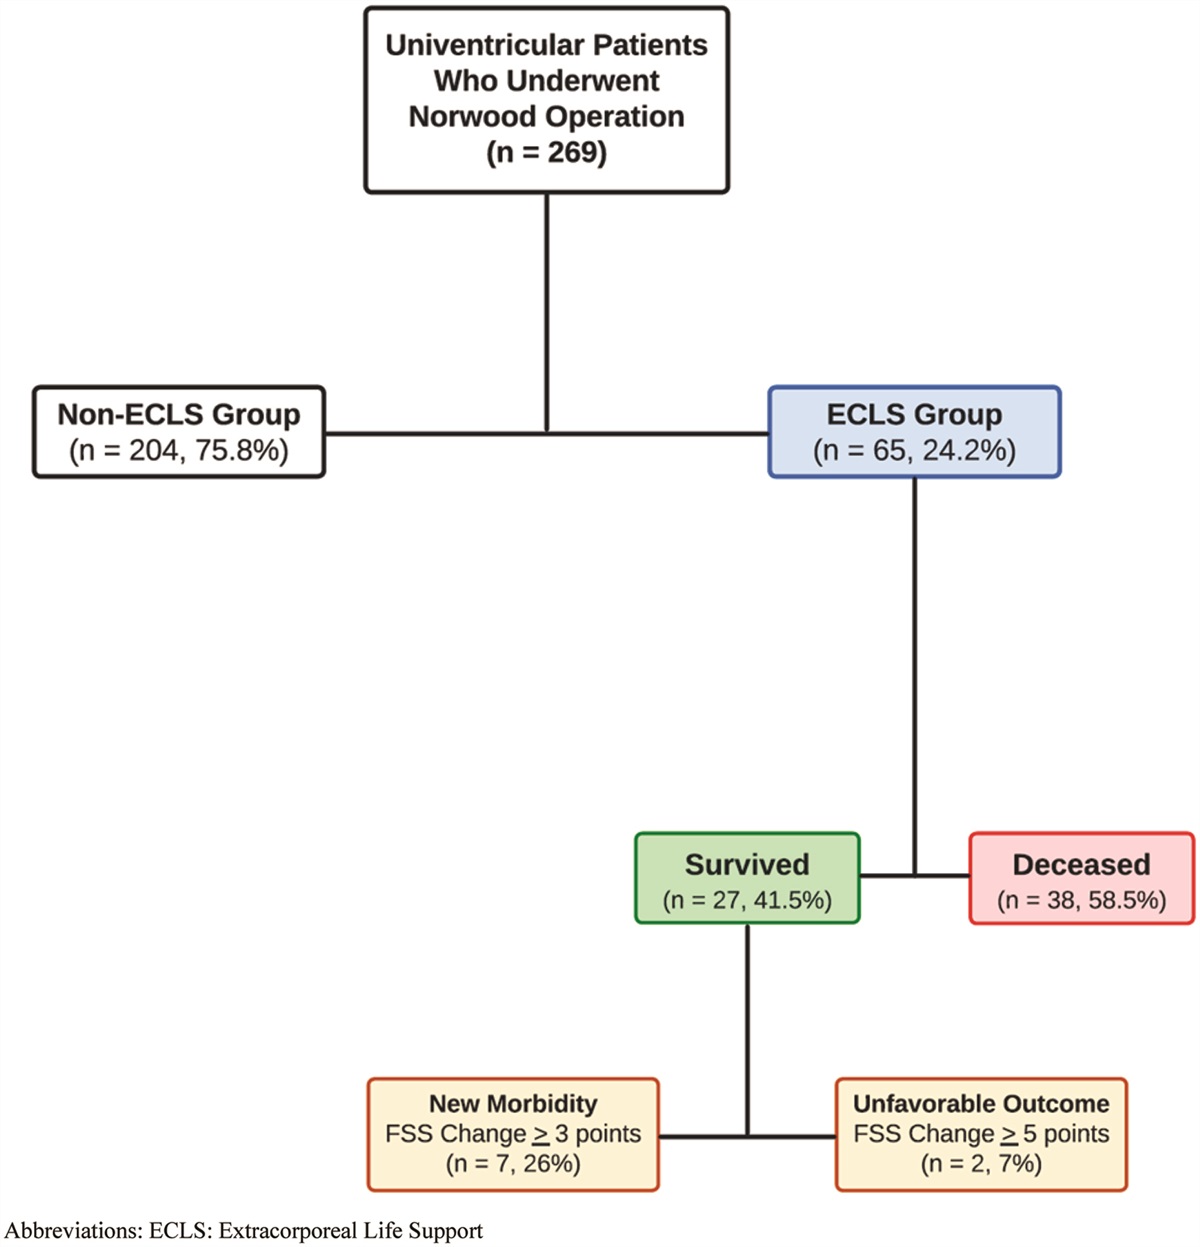 Short-Term Outcomes, Functional Status, and Risk Factors for Requiring Extracorporeal Life Support After Norwood Operation: A Single-Center Retrospective Study